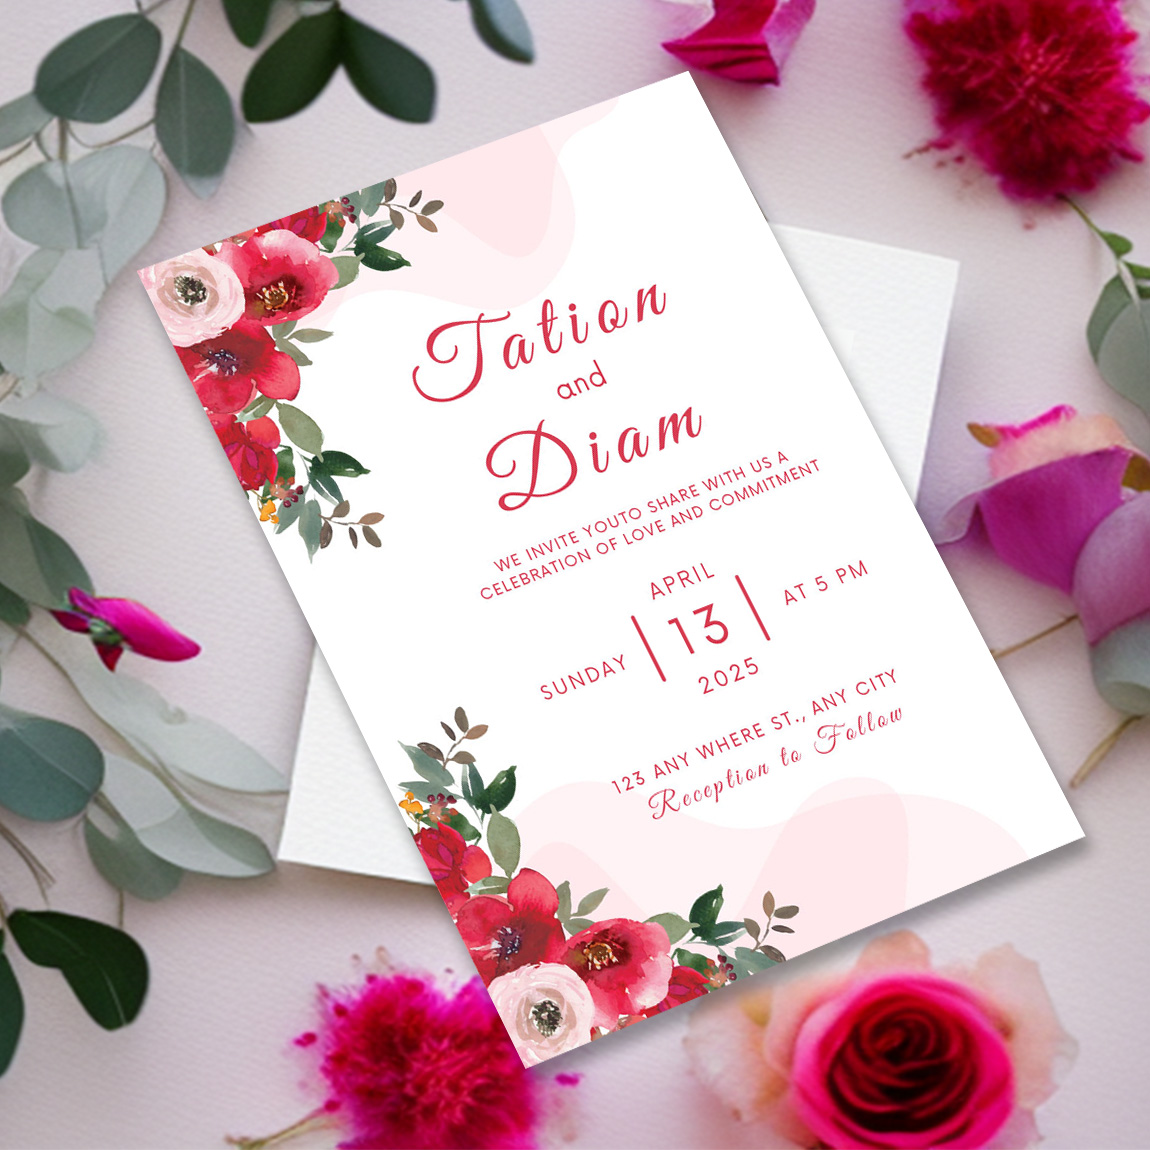 Image of amazing wedding invitation with floral design.